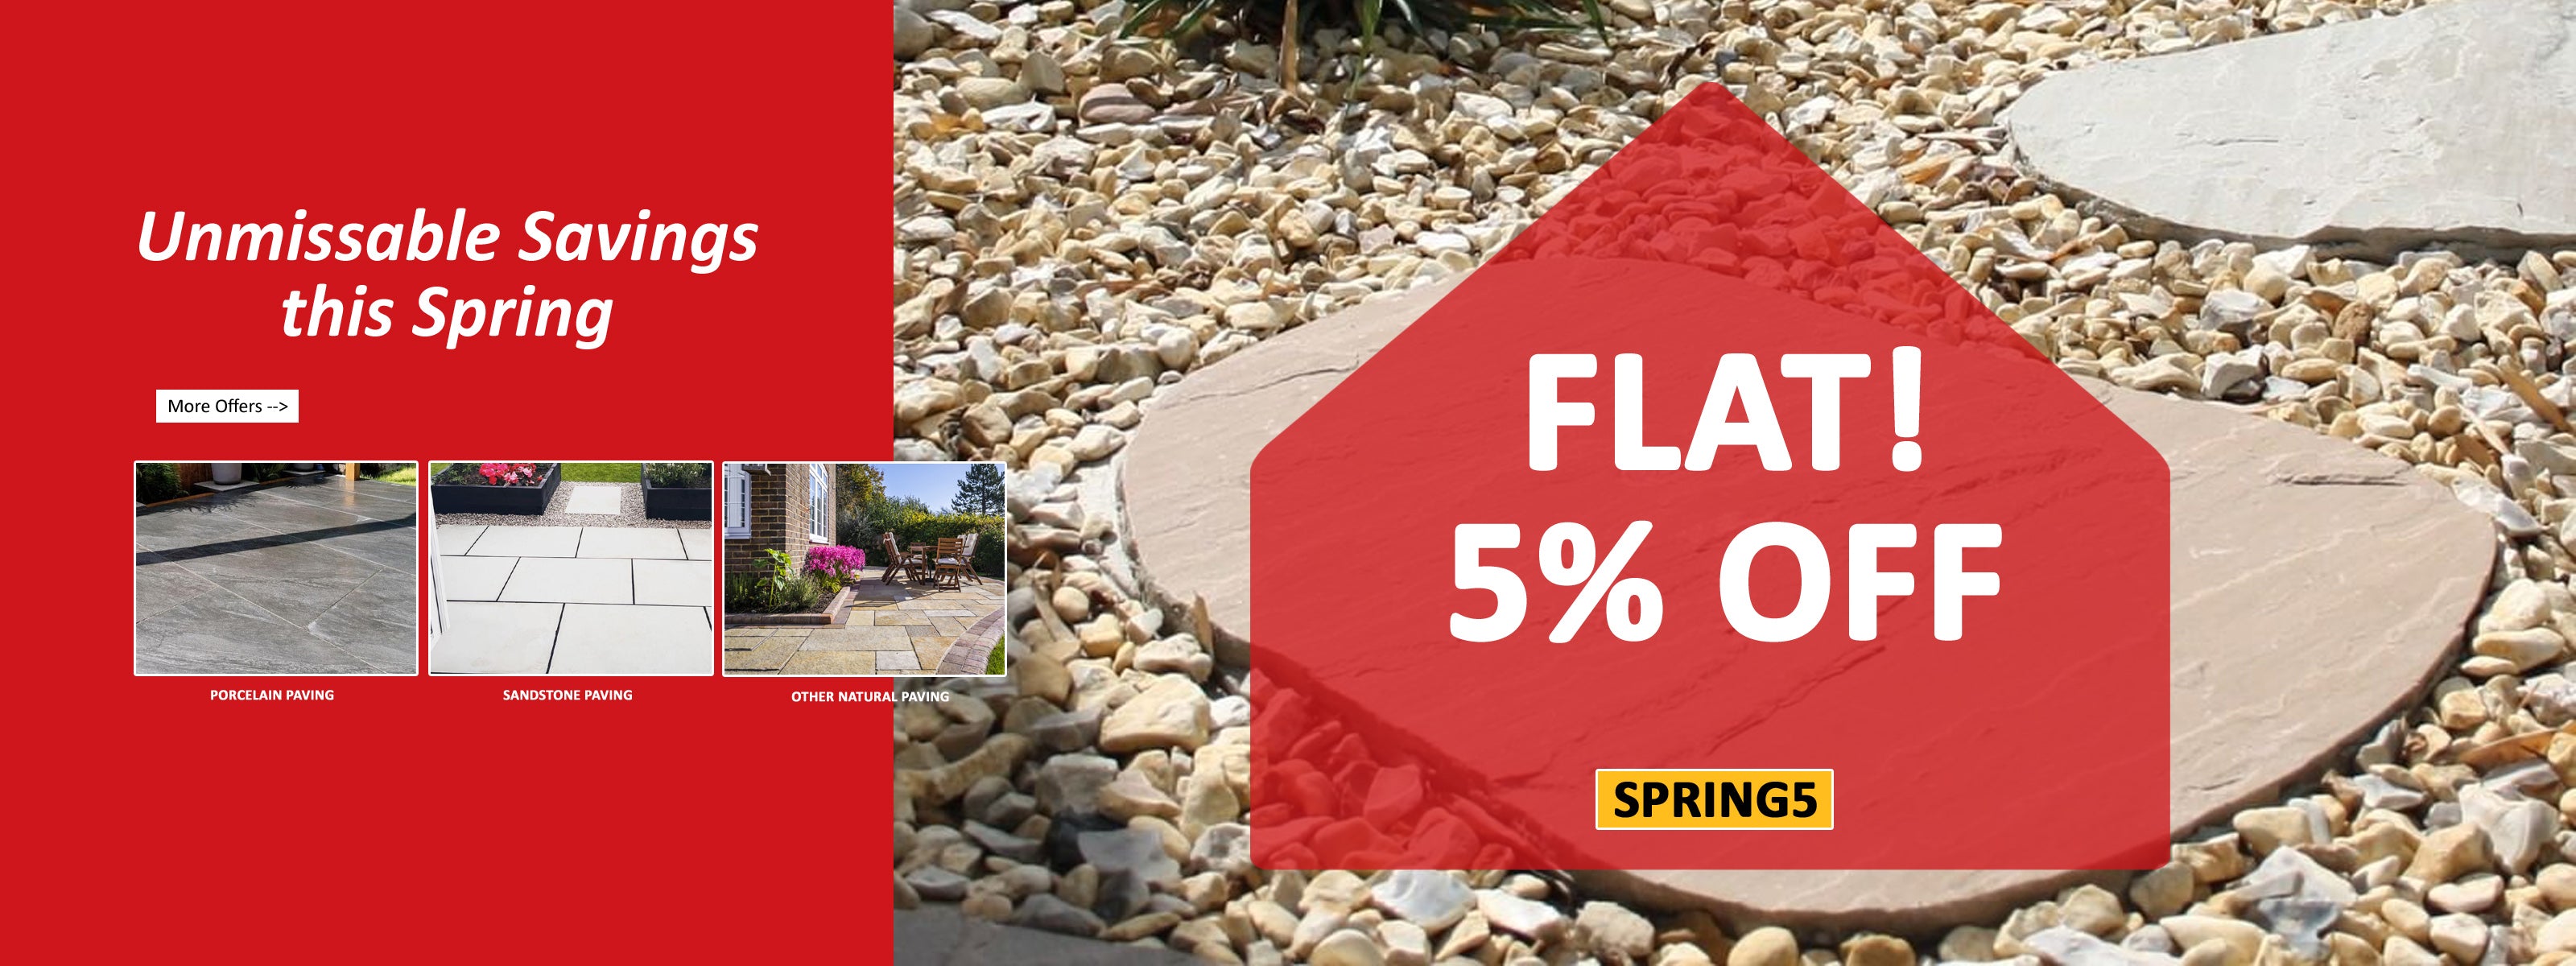 Unmissable Savings this Spring | FLAT! 5% OFF SPRING5